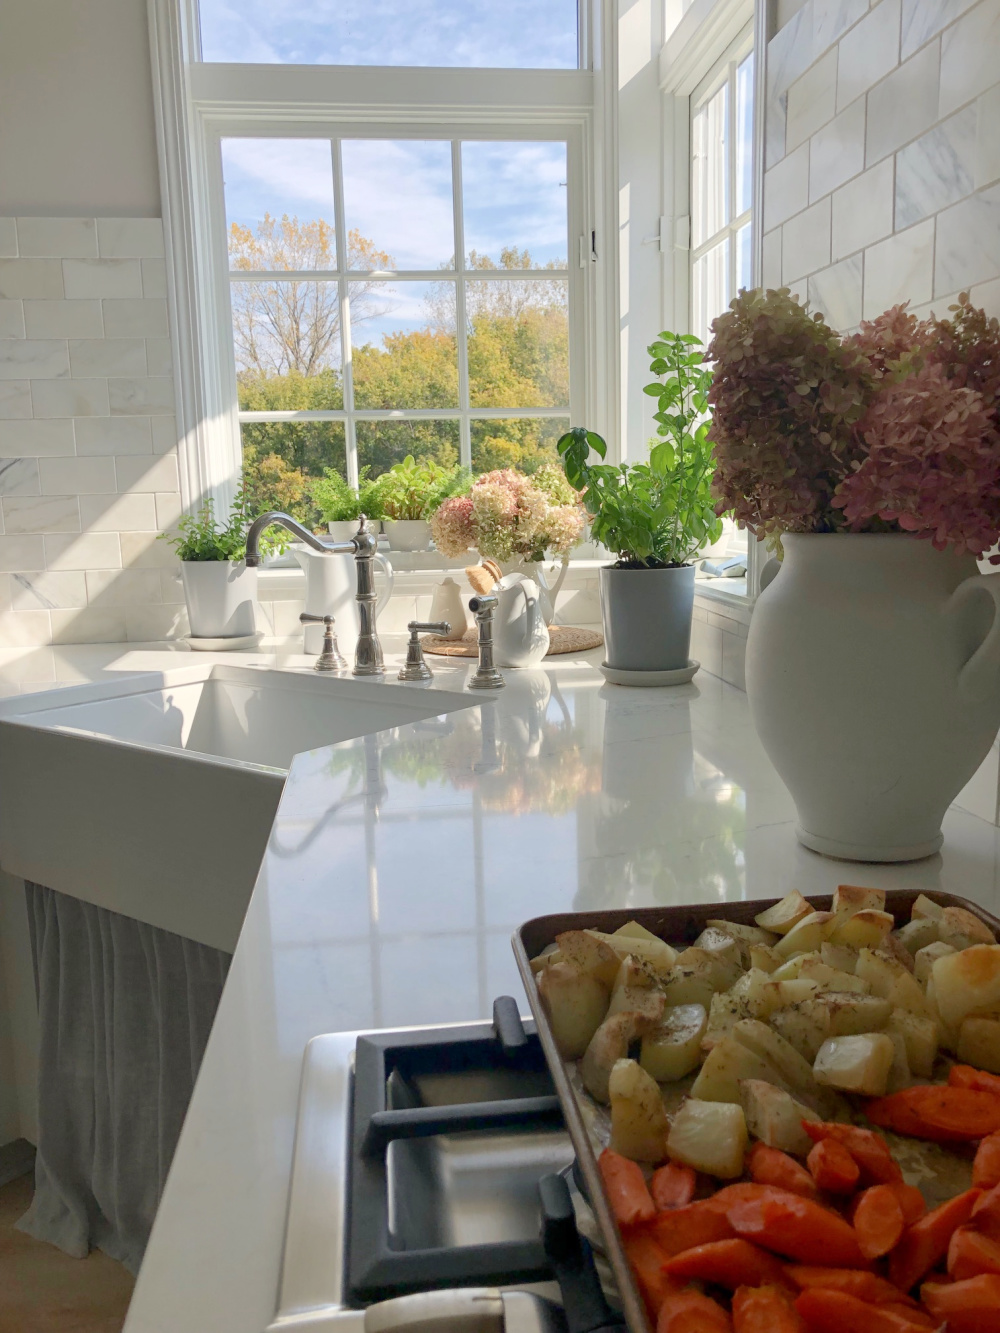 My kitchen in fall with roasted veges on the cooktop - Hello Lovely Studio.